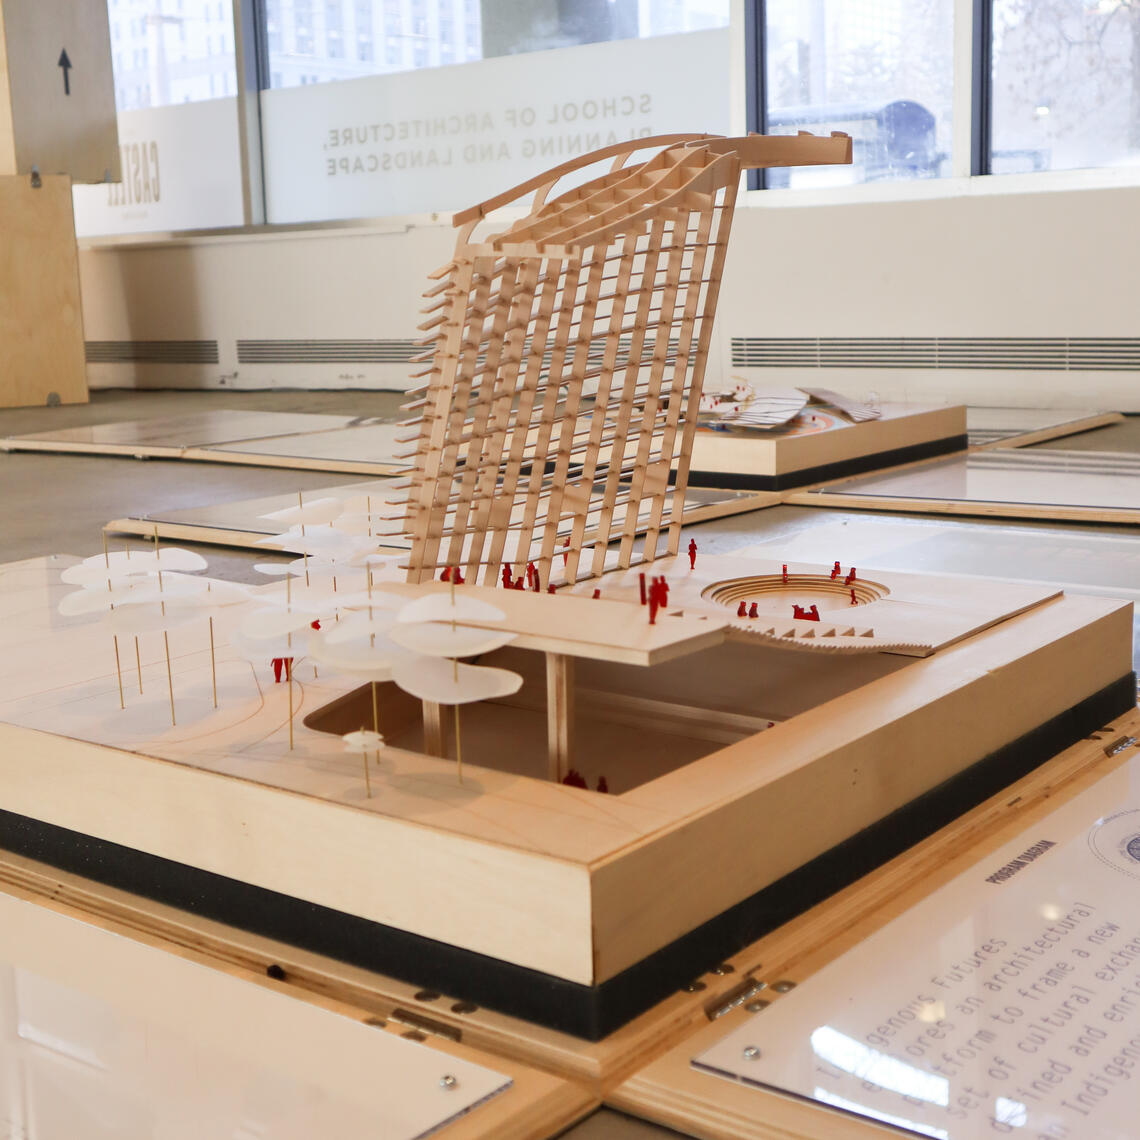 Architectural Wood Model from the marc boutin architectural collaborative